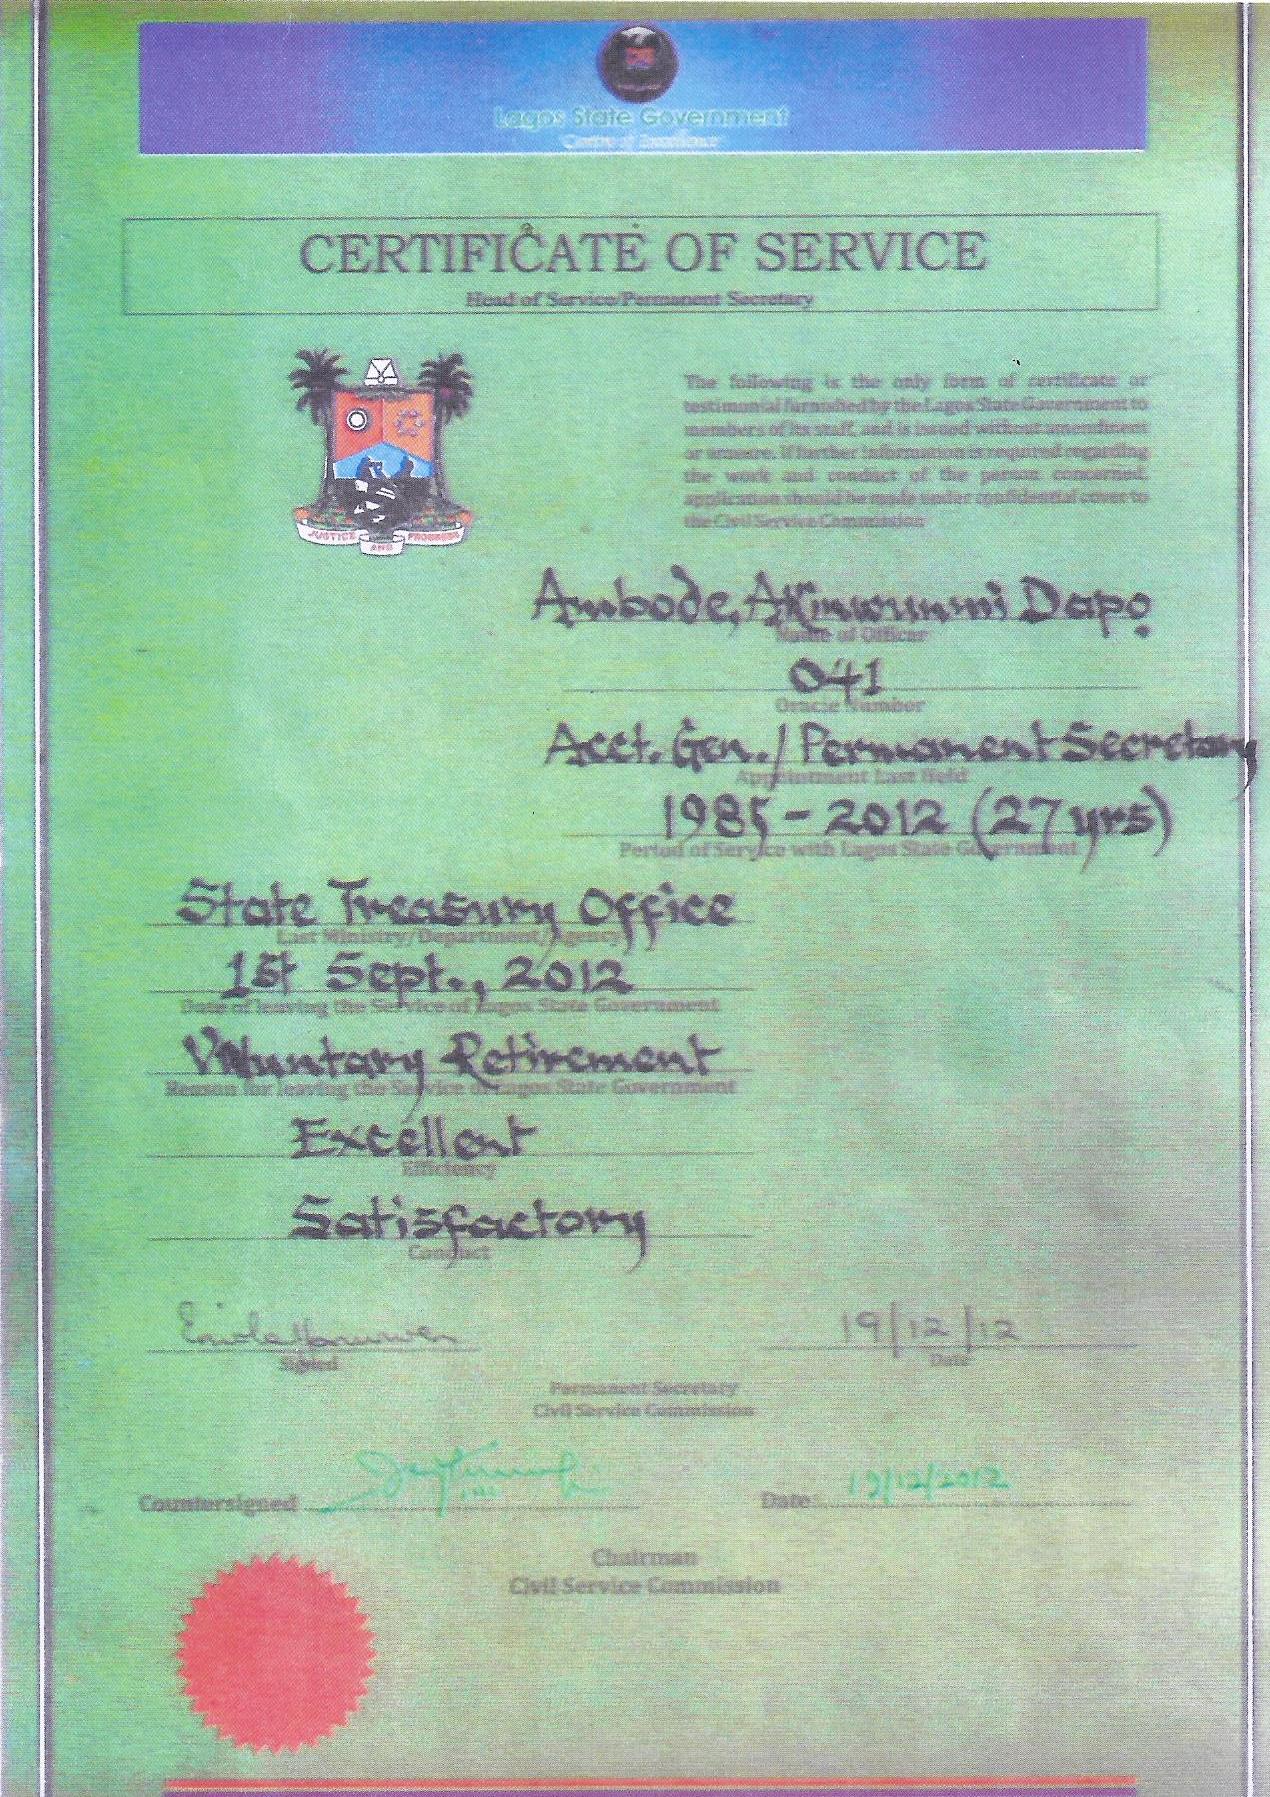 The Certificate of Service Given to Akinwunmi Ambode Upon His Retirement in 2012